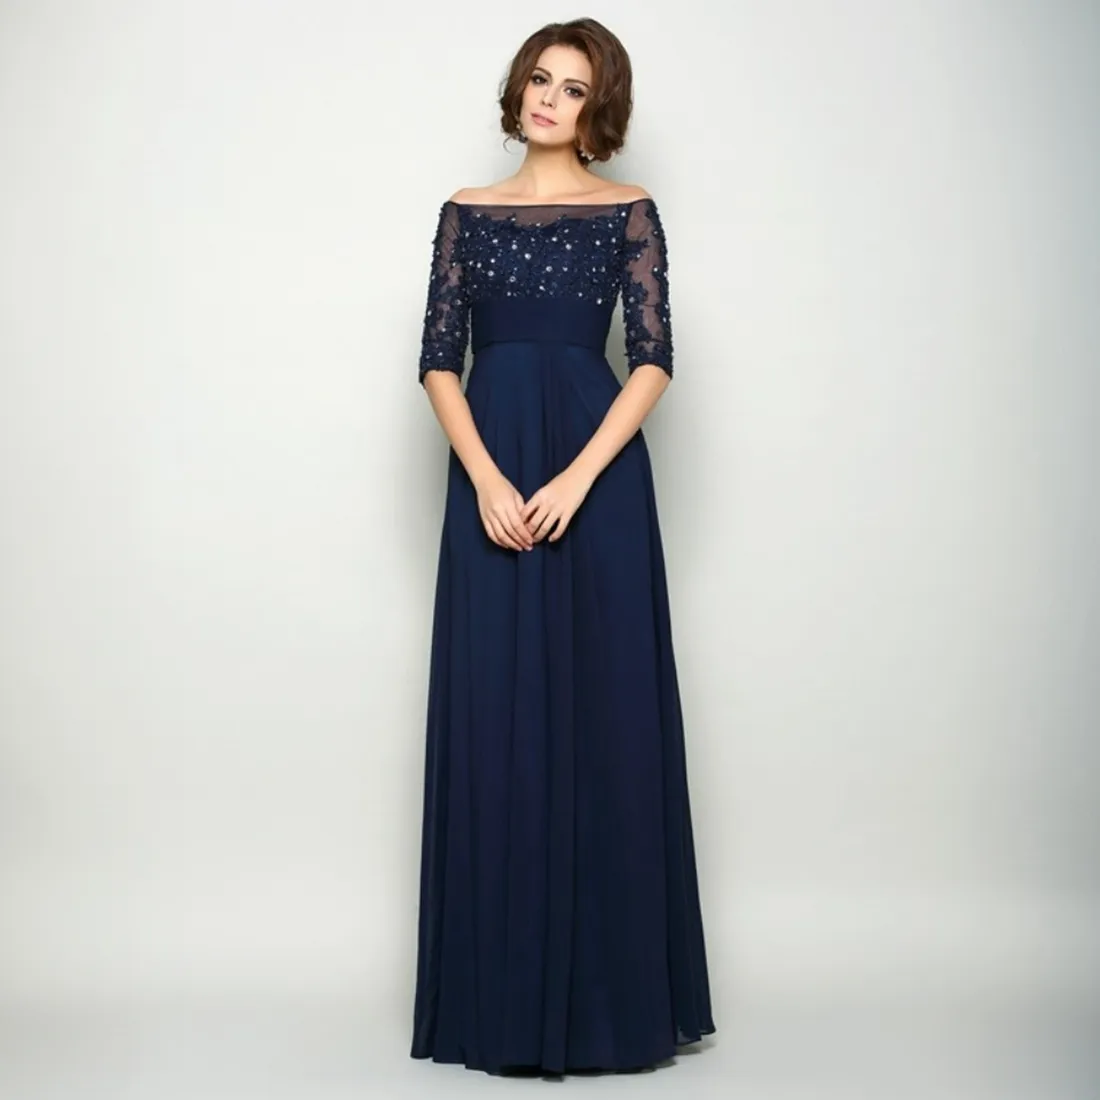 Navy Blue Mother Of The Bride Dresses Off Shoulder Half Sleeves A Line Beaded Lace Mother's Dresses Chiffon Mother of Groom Gowns Wedding Guest Gown AMM040